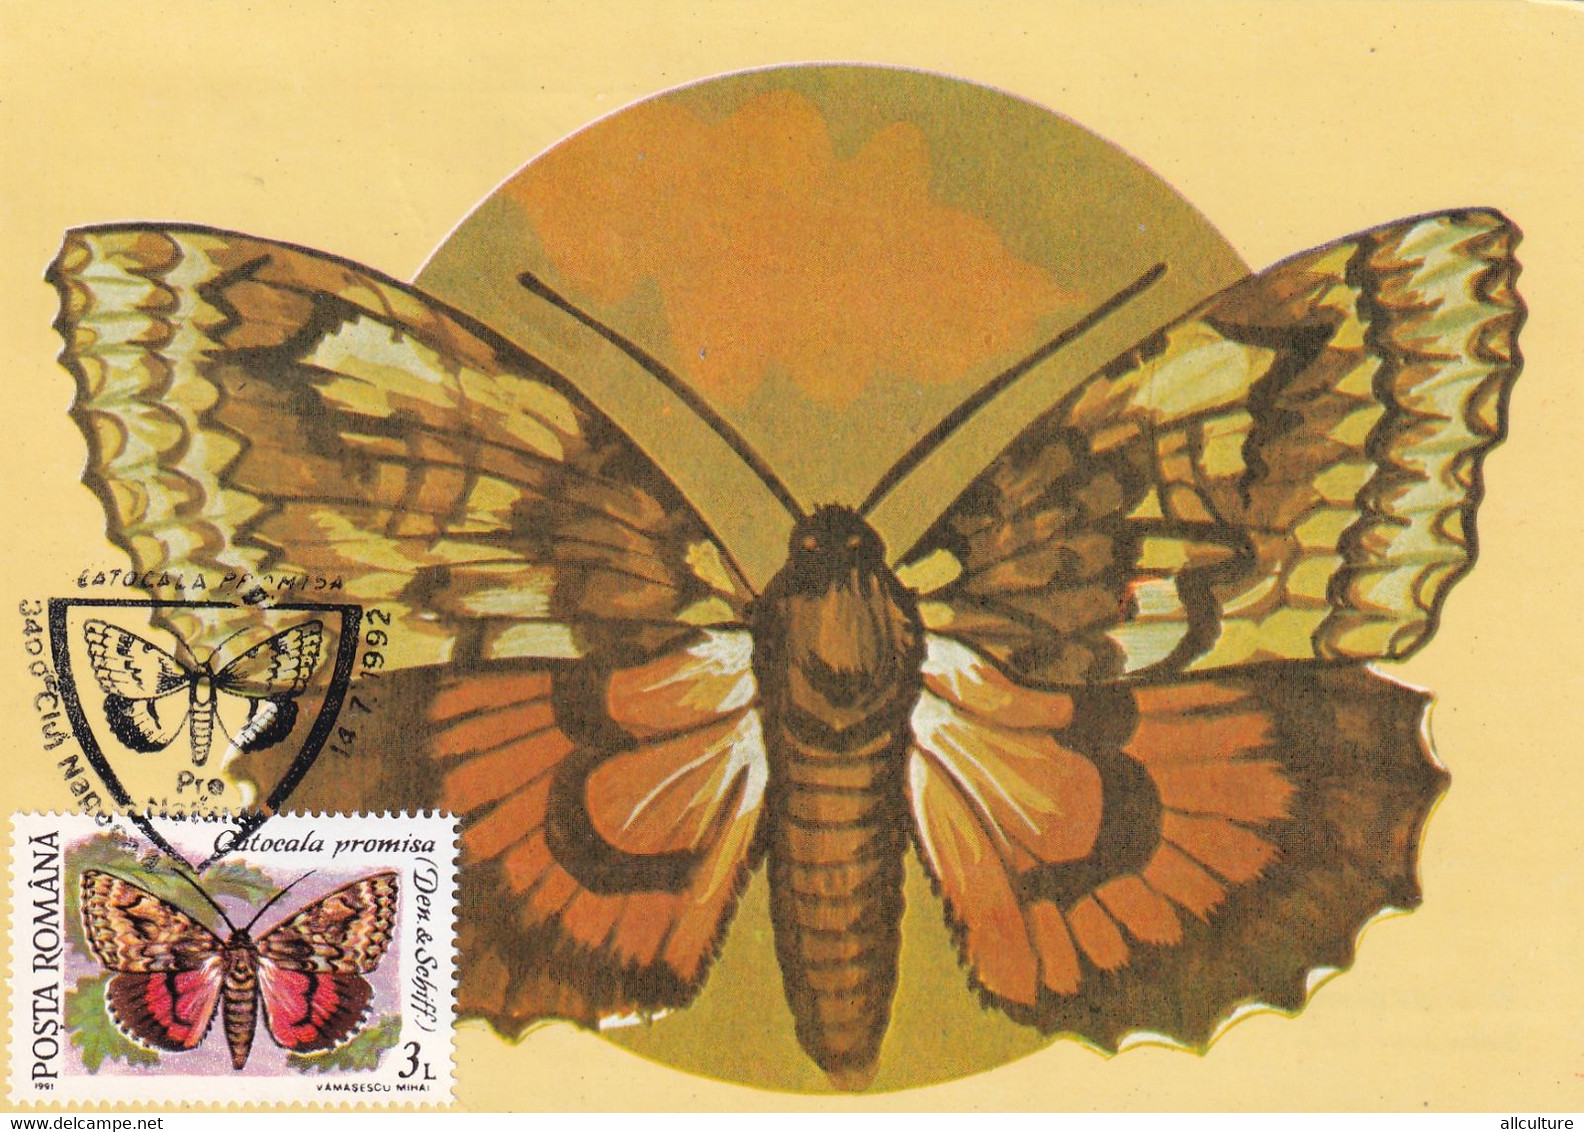 A9039- CATOCALA PROMISA BUTTERFLY, PRONATURE CLUJ NAPOCA 1992 ROMANIA, MAX CARD USED STAMP ON COVER POSTCARD - Vlinders